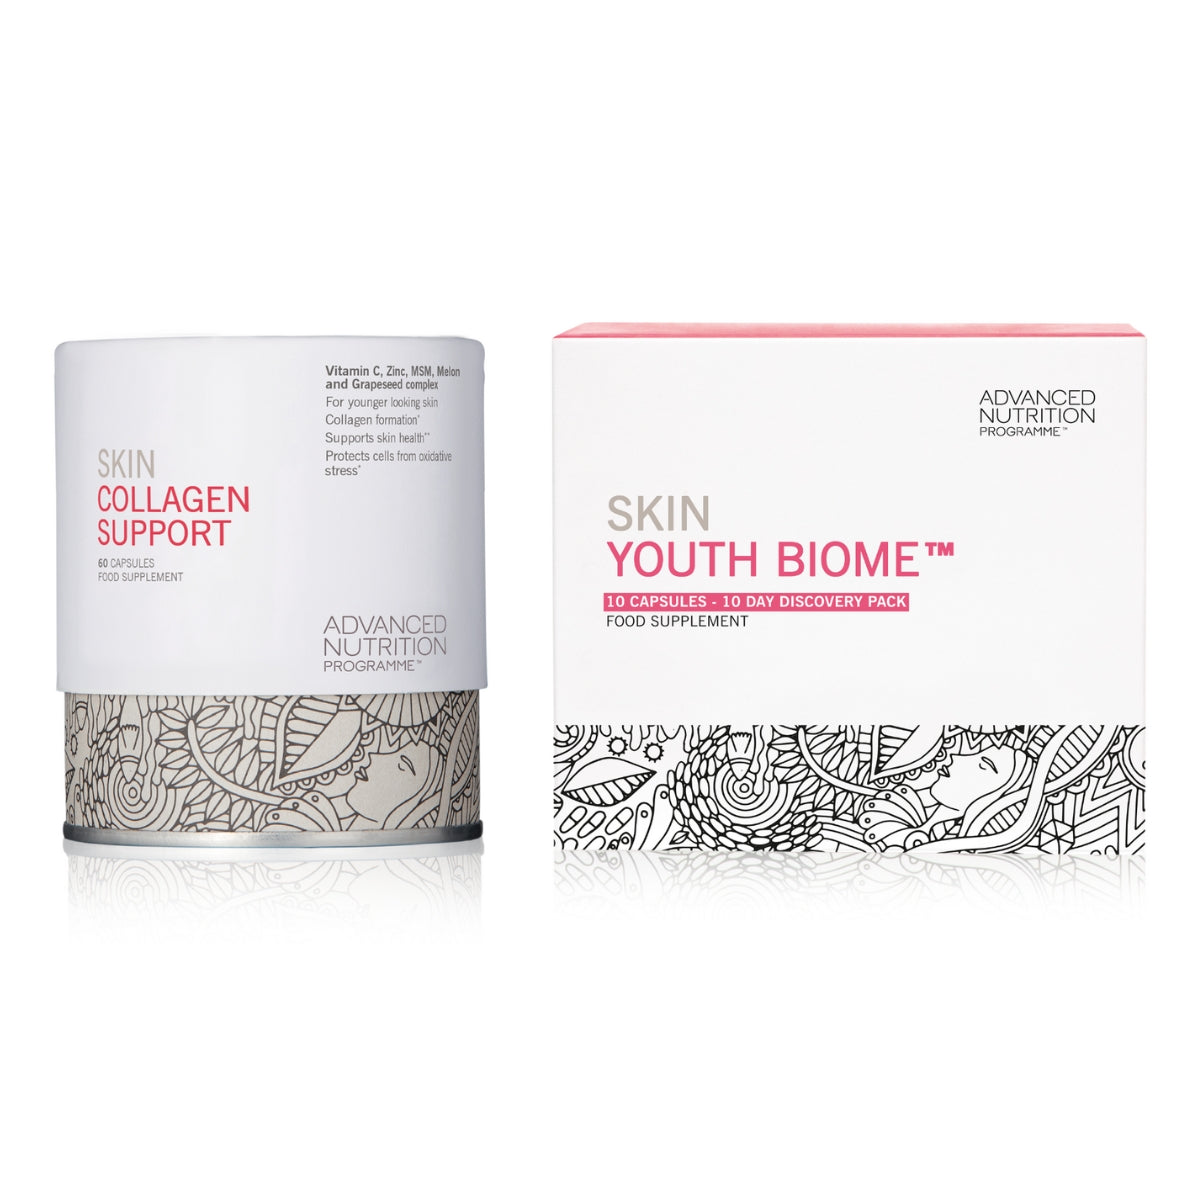 Advanced Nutrition Programme Collagen Support & Discovery Skin Youth Biome